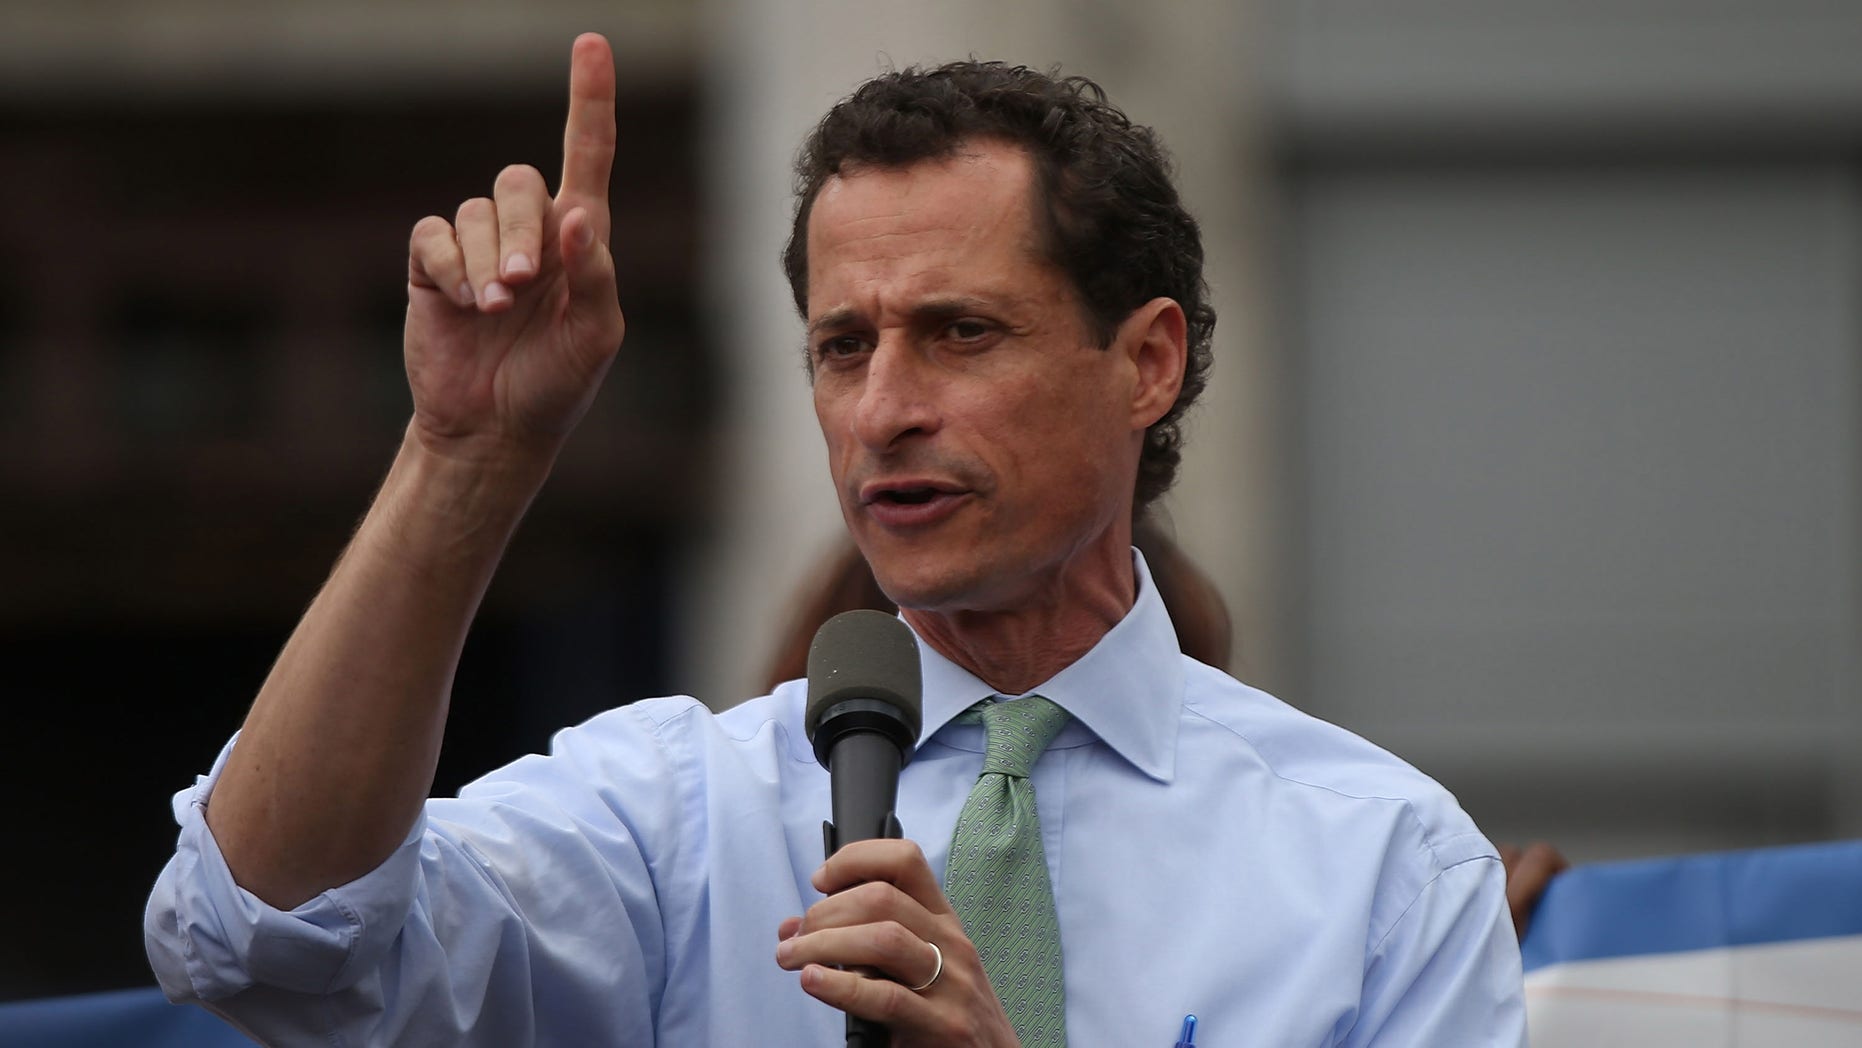 Carlos Danger Is Back Anthony Weiner Gets Job At Crisis Communications Company Fox News